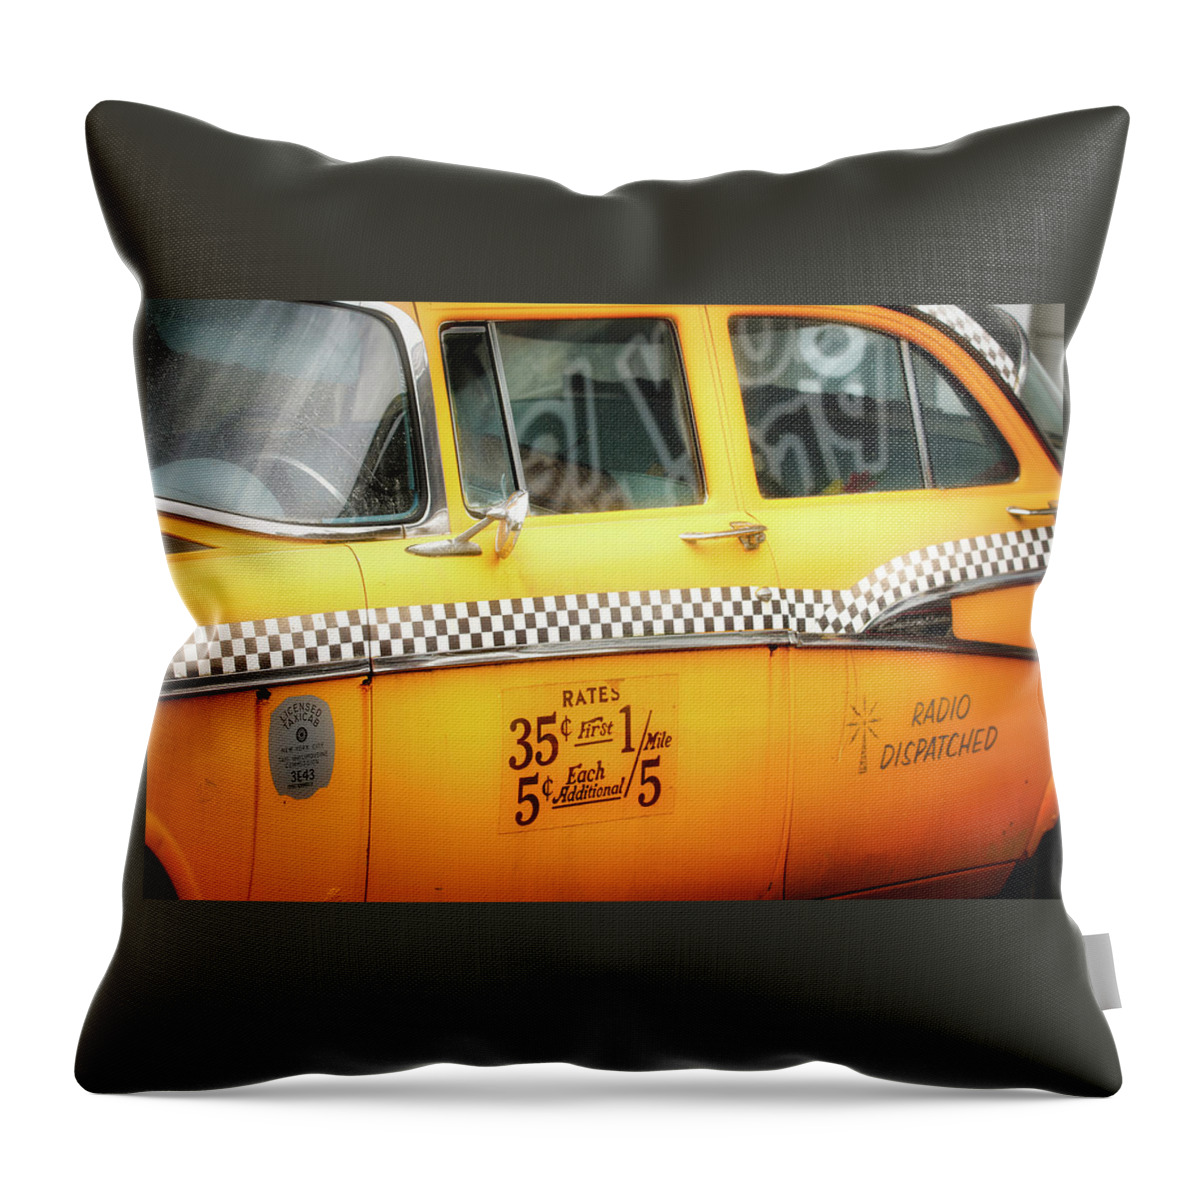 Taxi Throw Pillow featuring the photograph Vintage New York City Taxi by Scott Burd